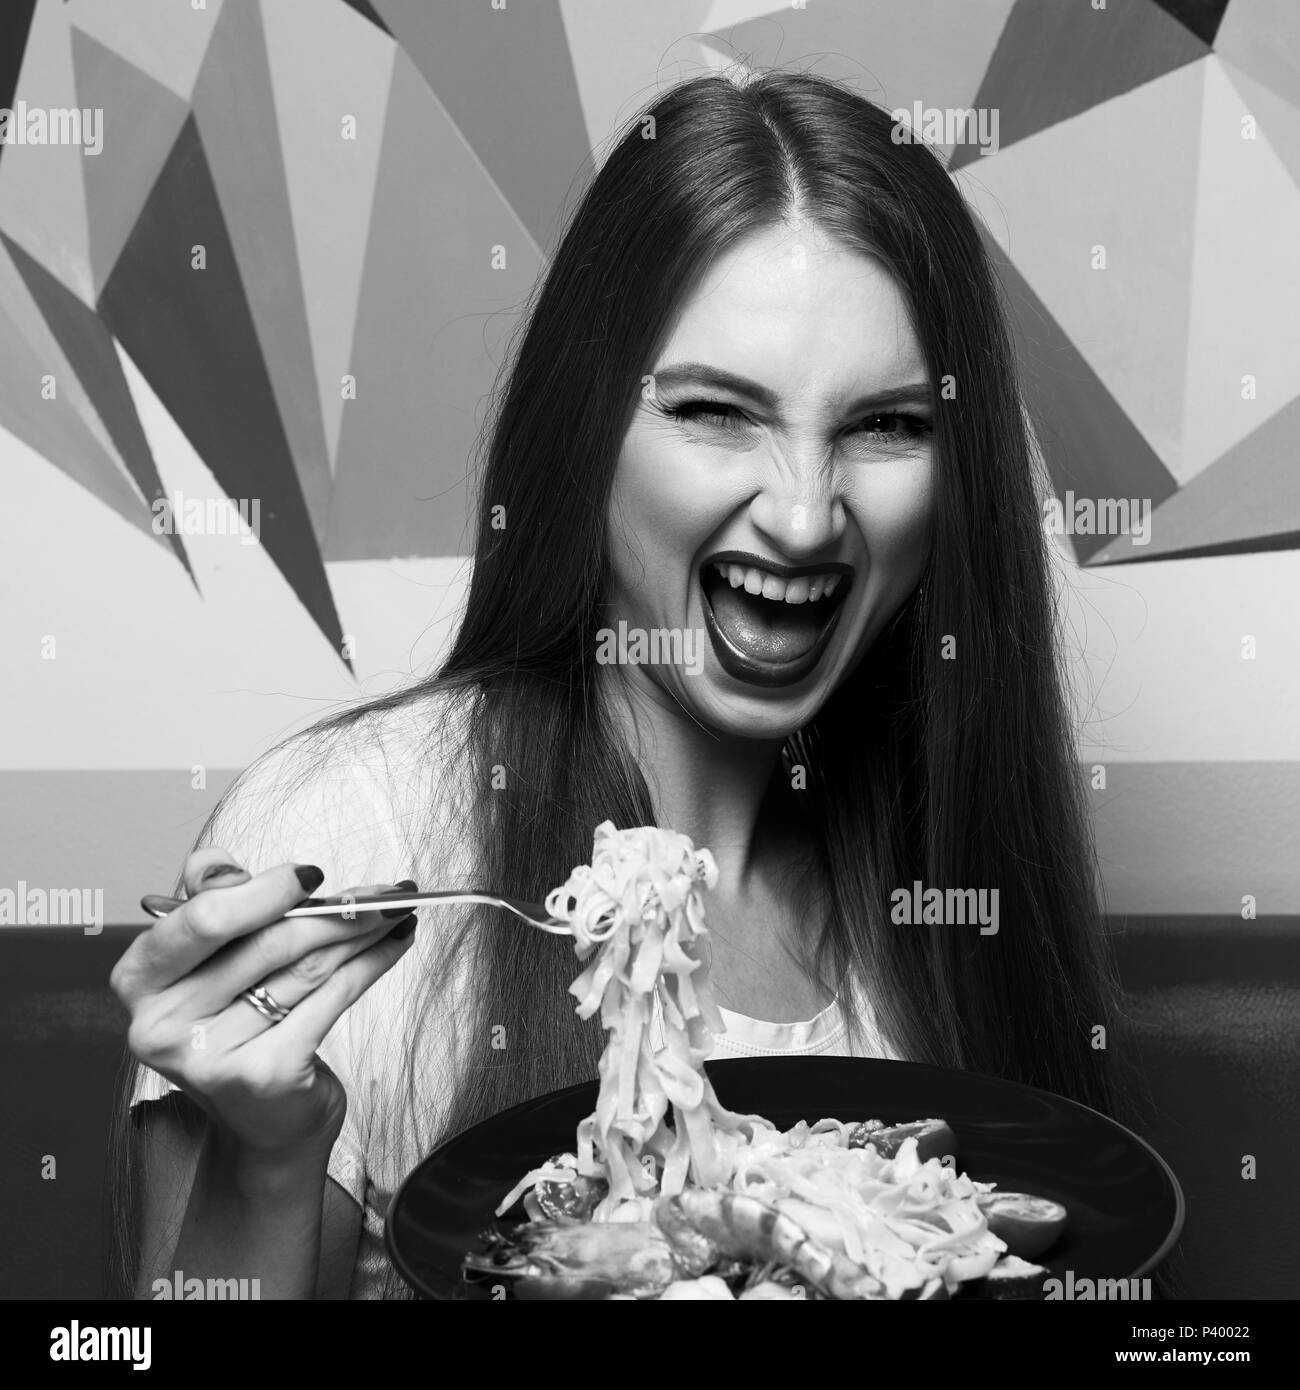 Beautiful woman with expressively opened mouth eating fettuccine Stock Photo